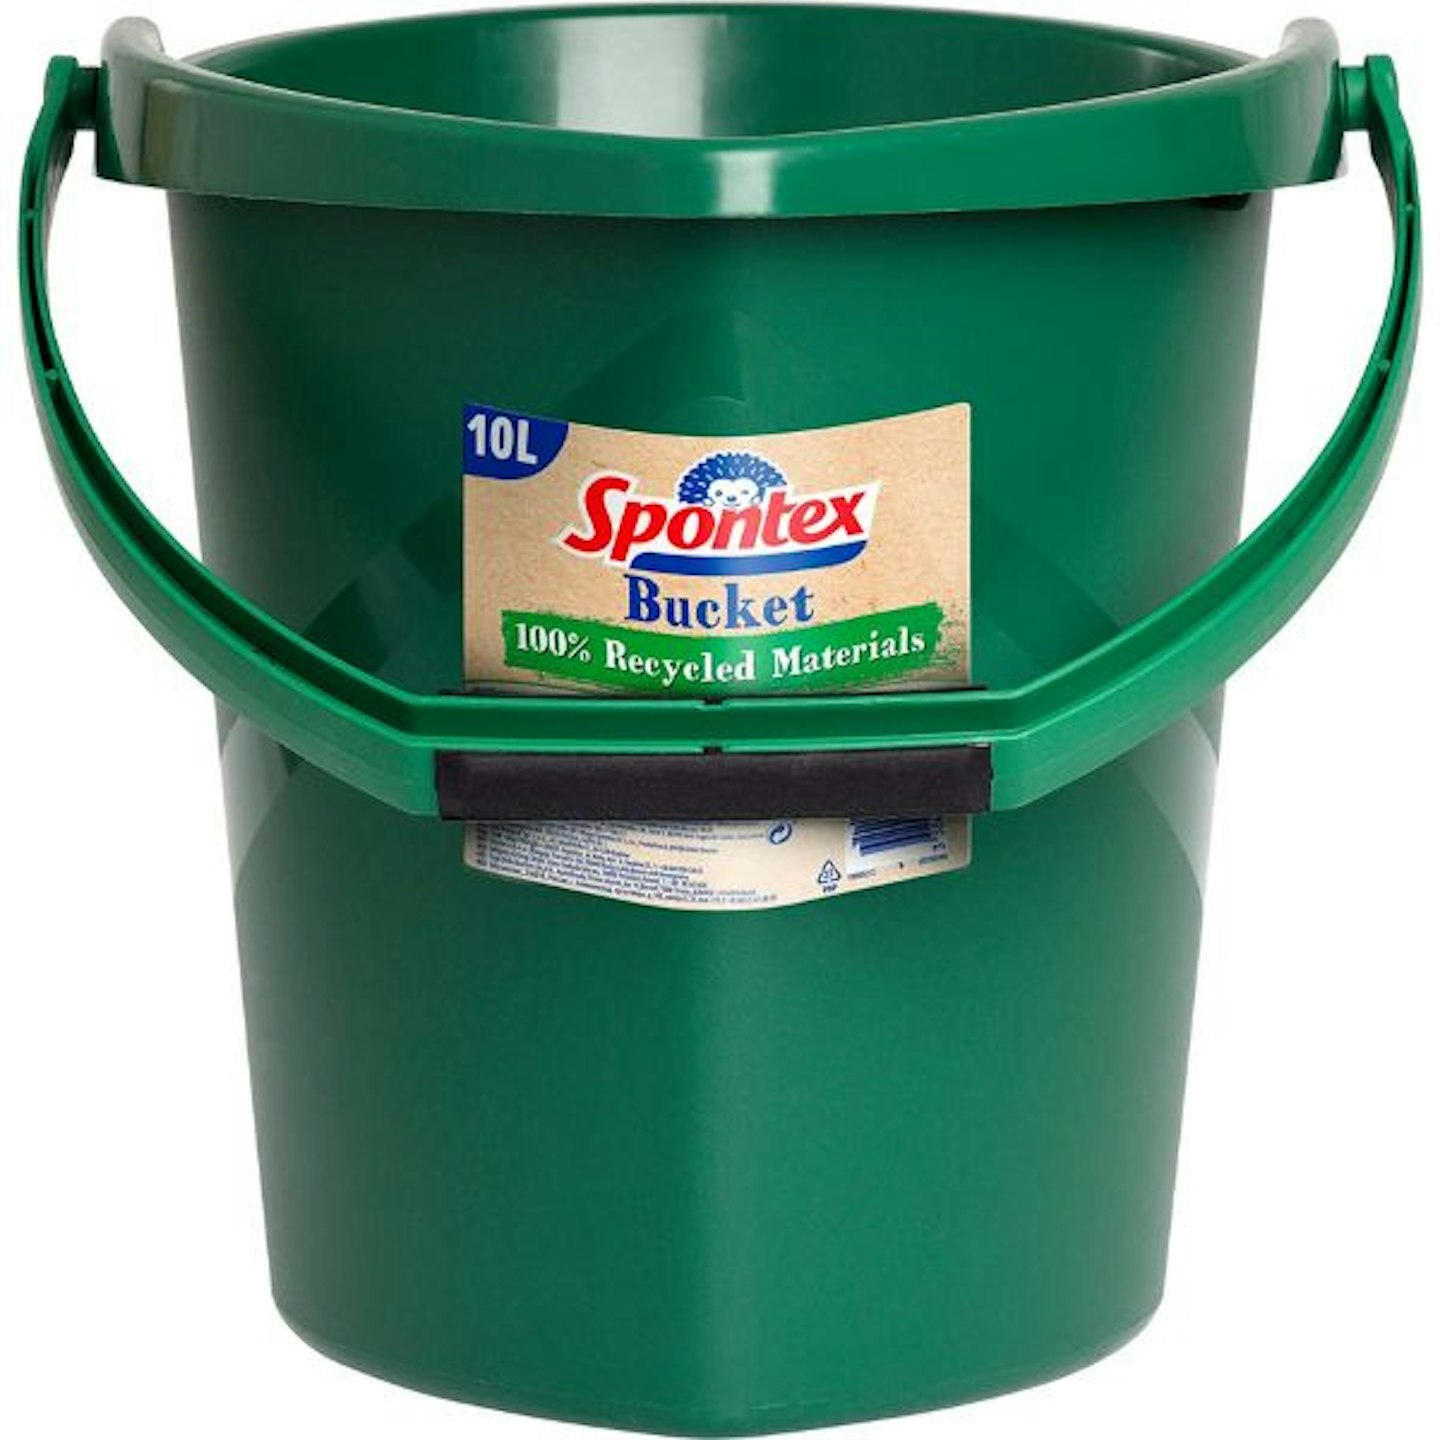 Spontex Bucket made from 100% recycled materials